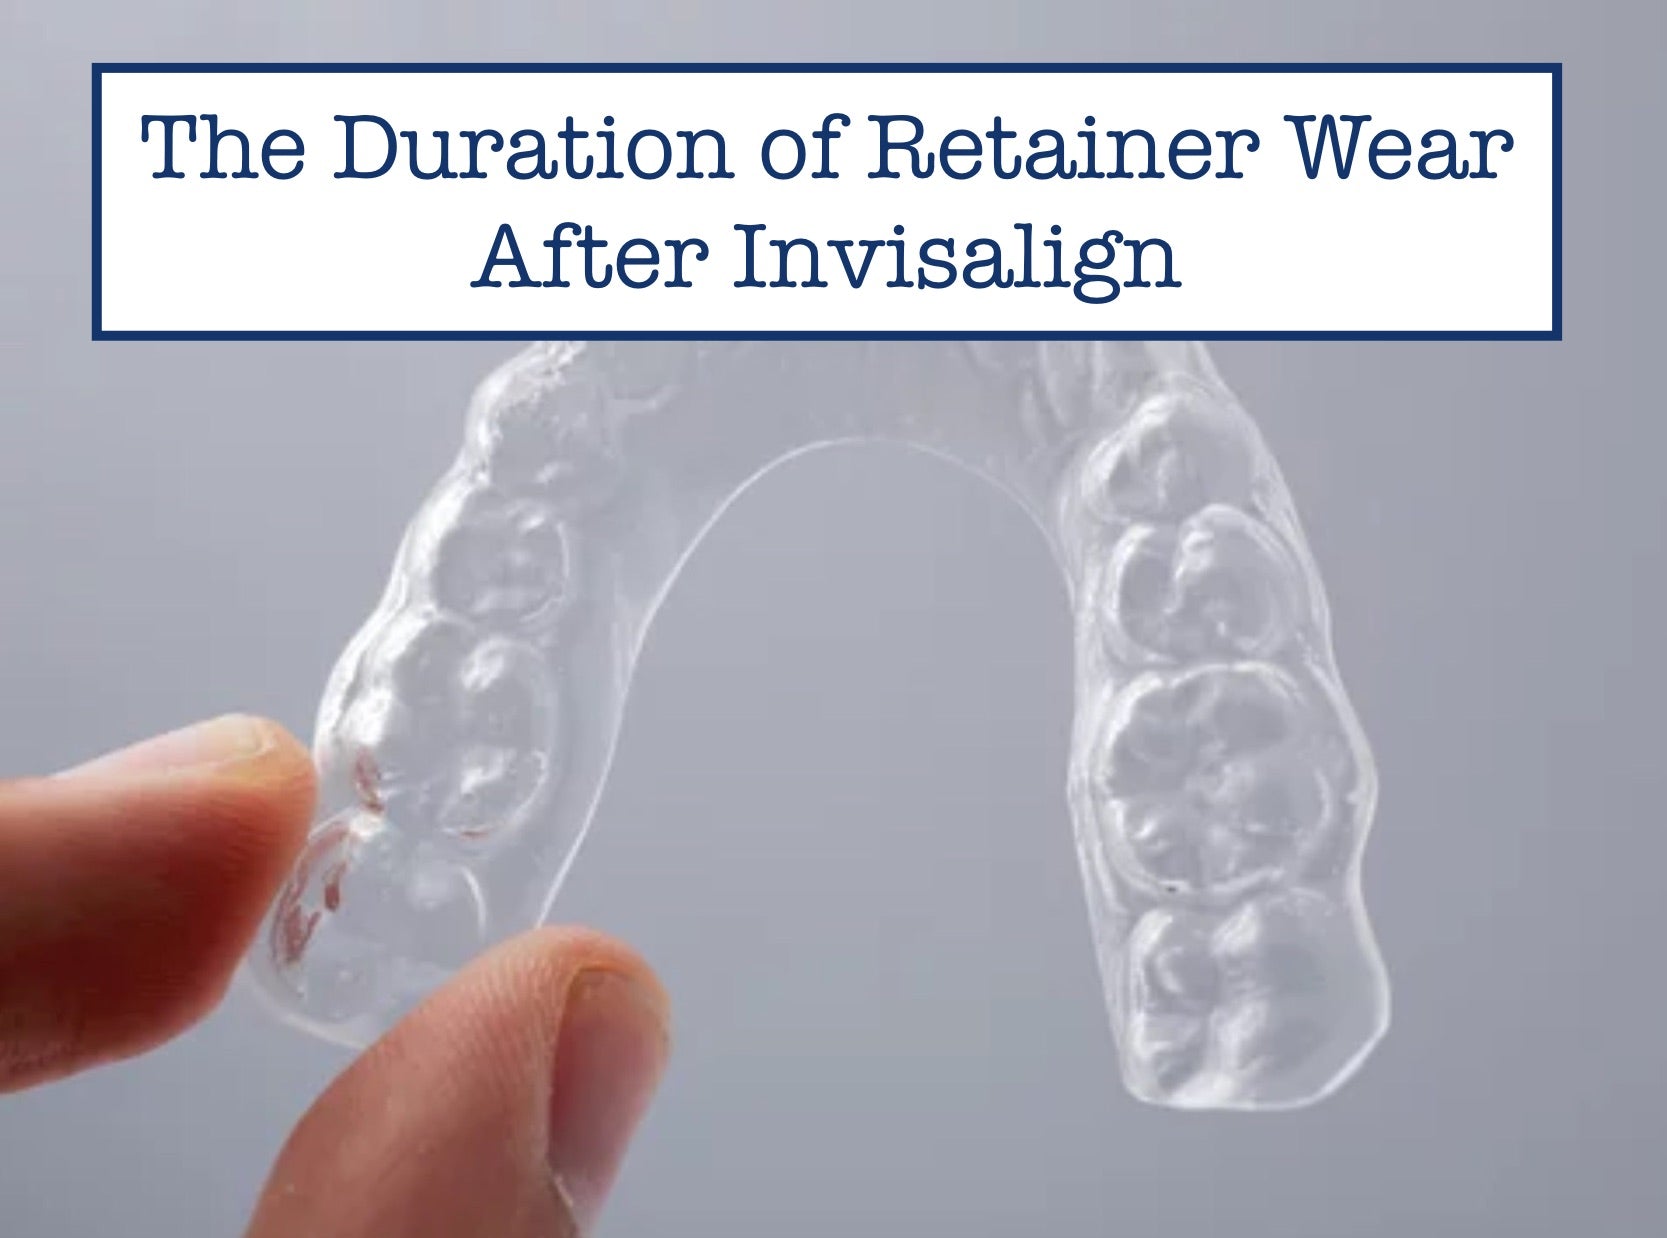 The Duration of Retainer Wear After Invisalign